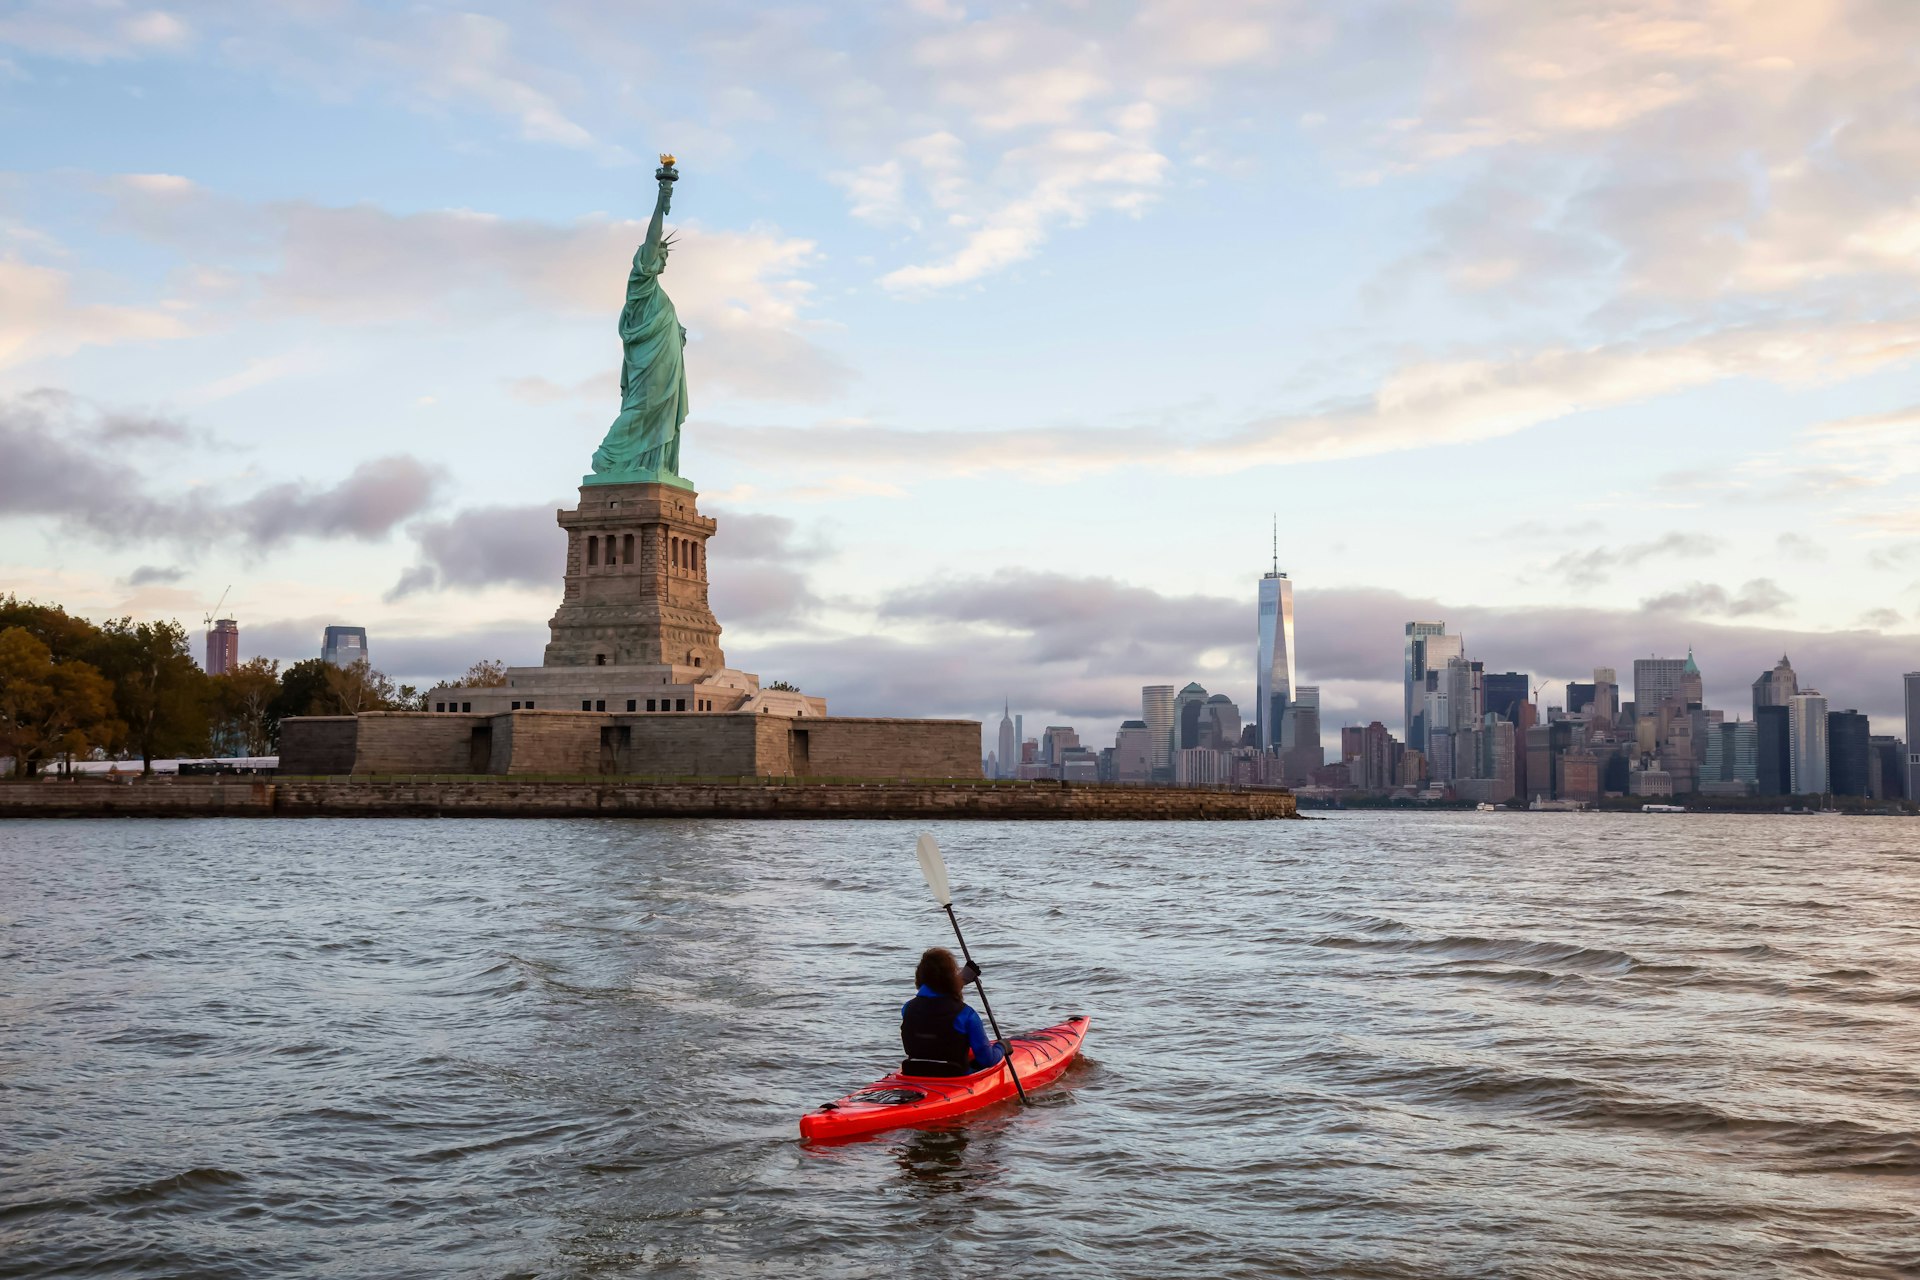 A red kayak in the water in front of the Statue of Liberty